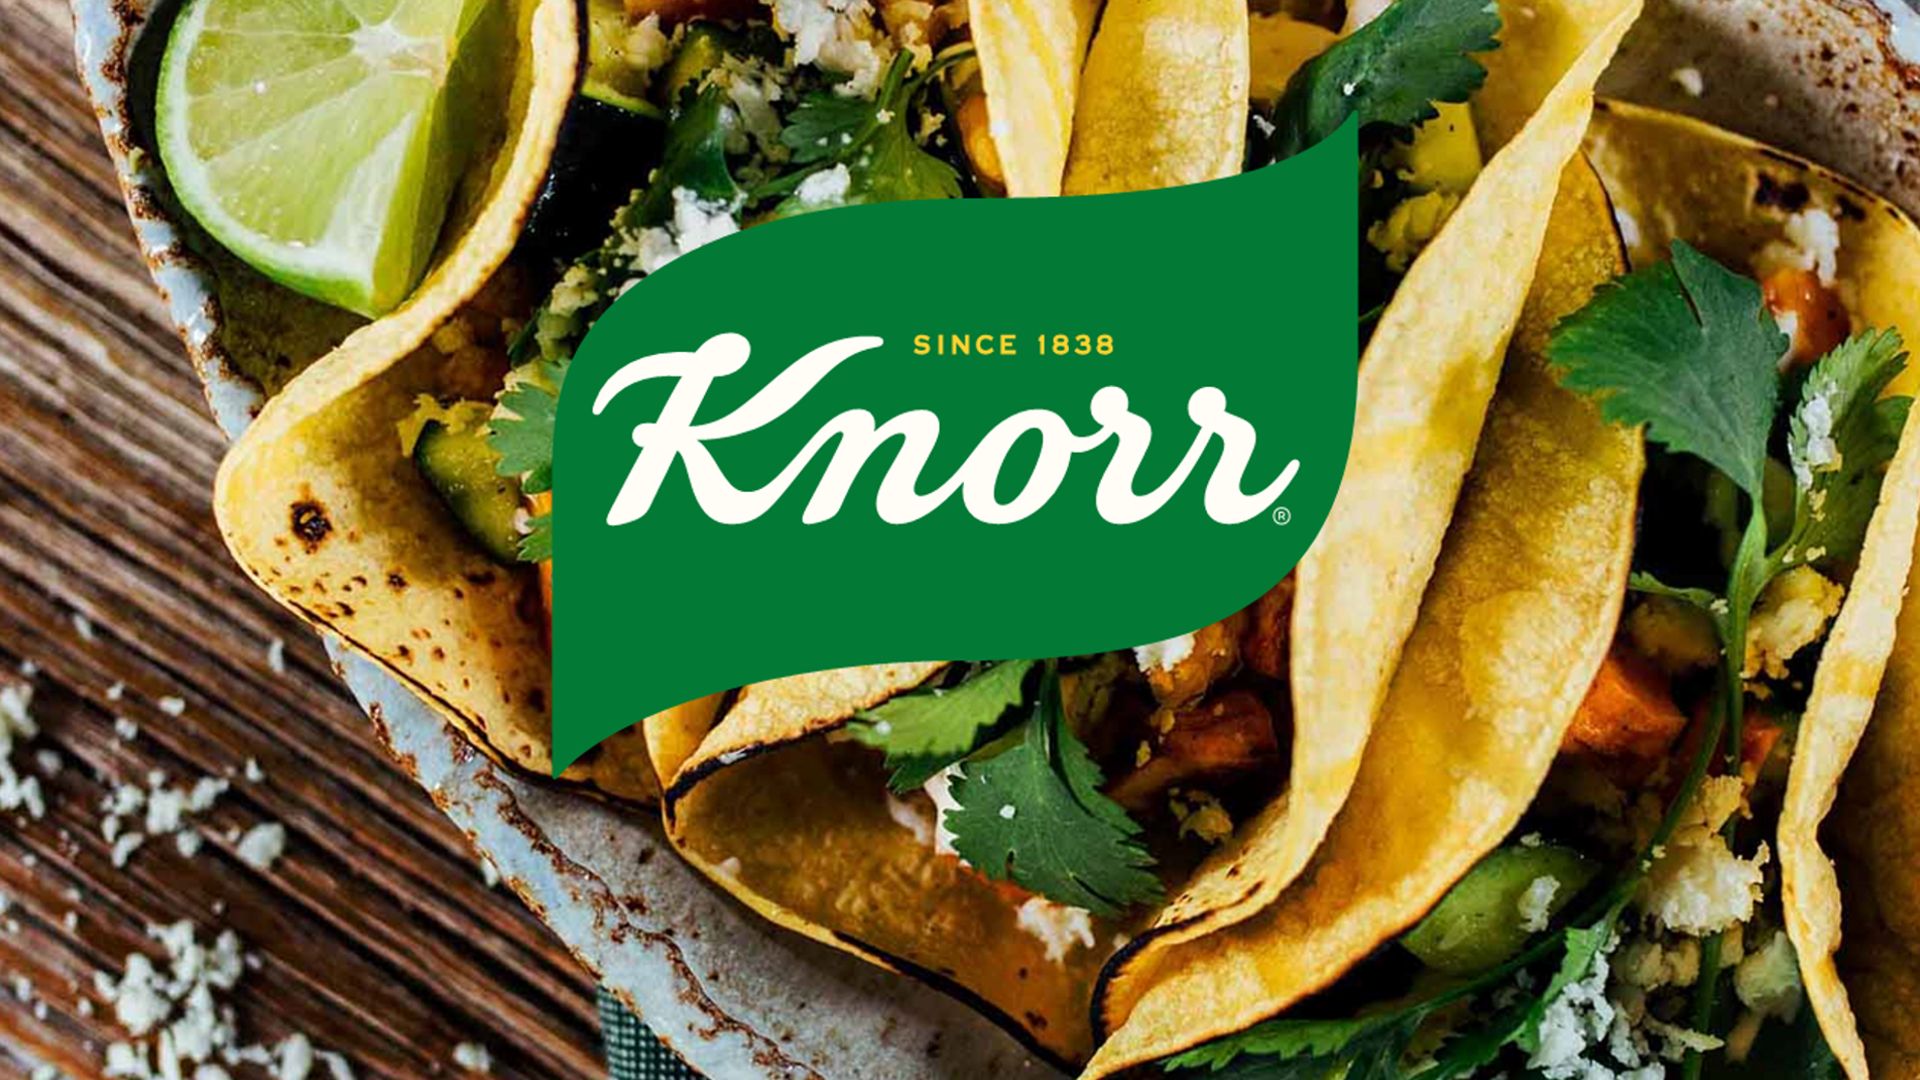 Tacos and knorr logo